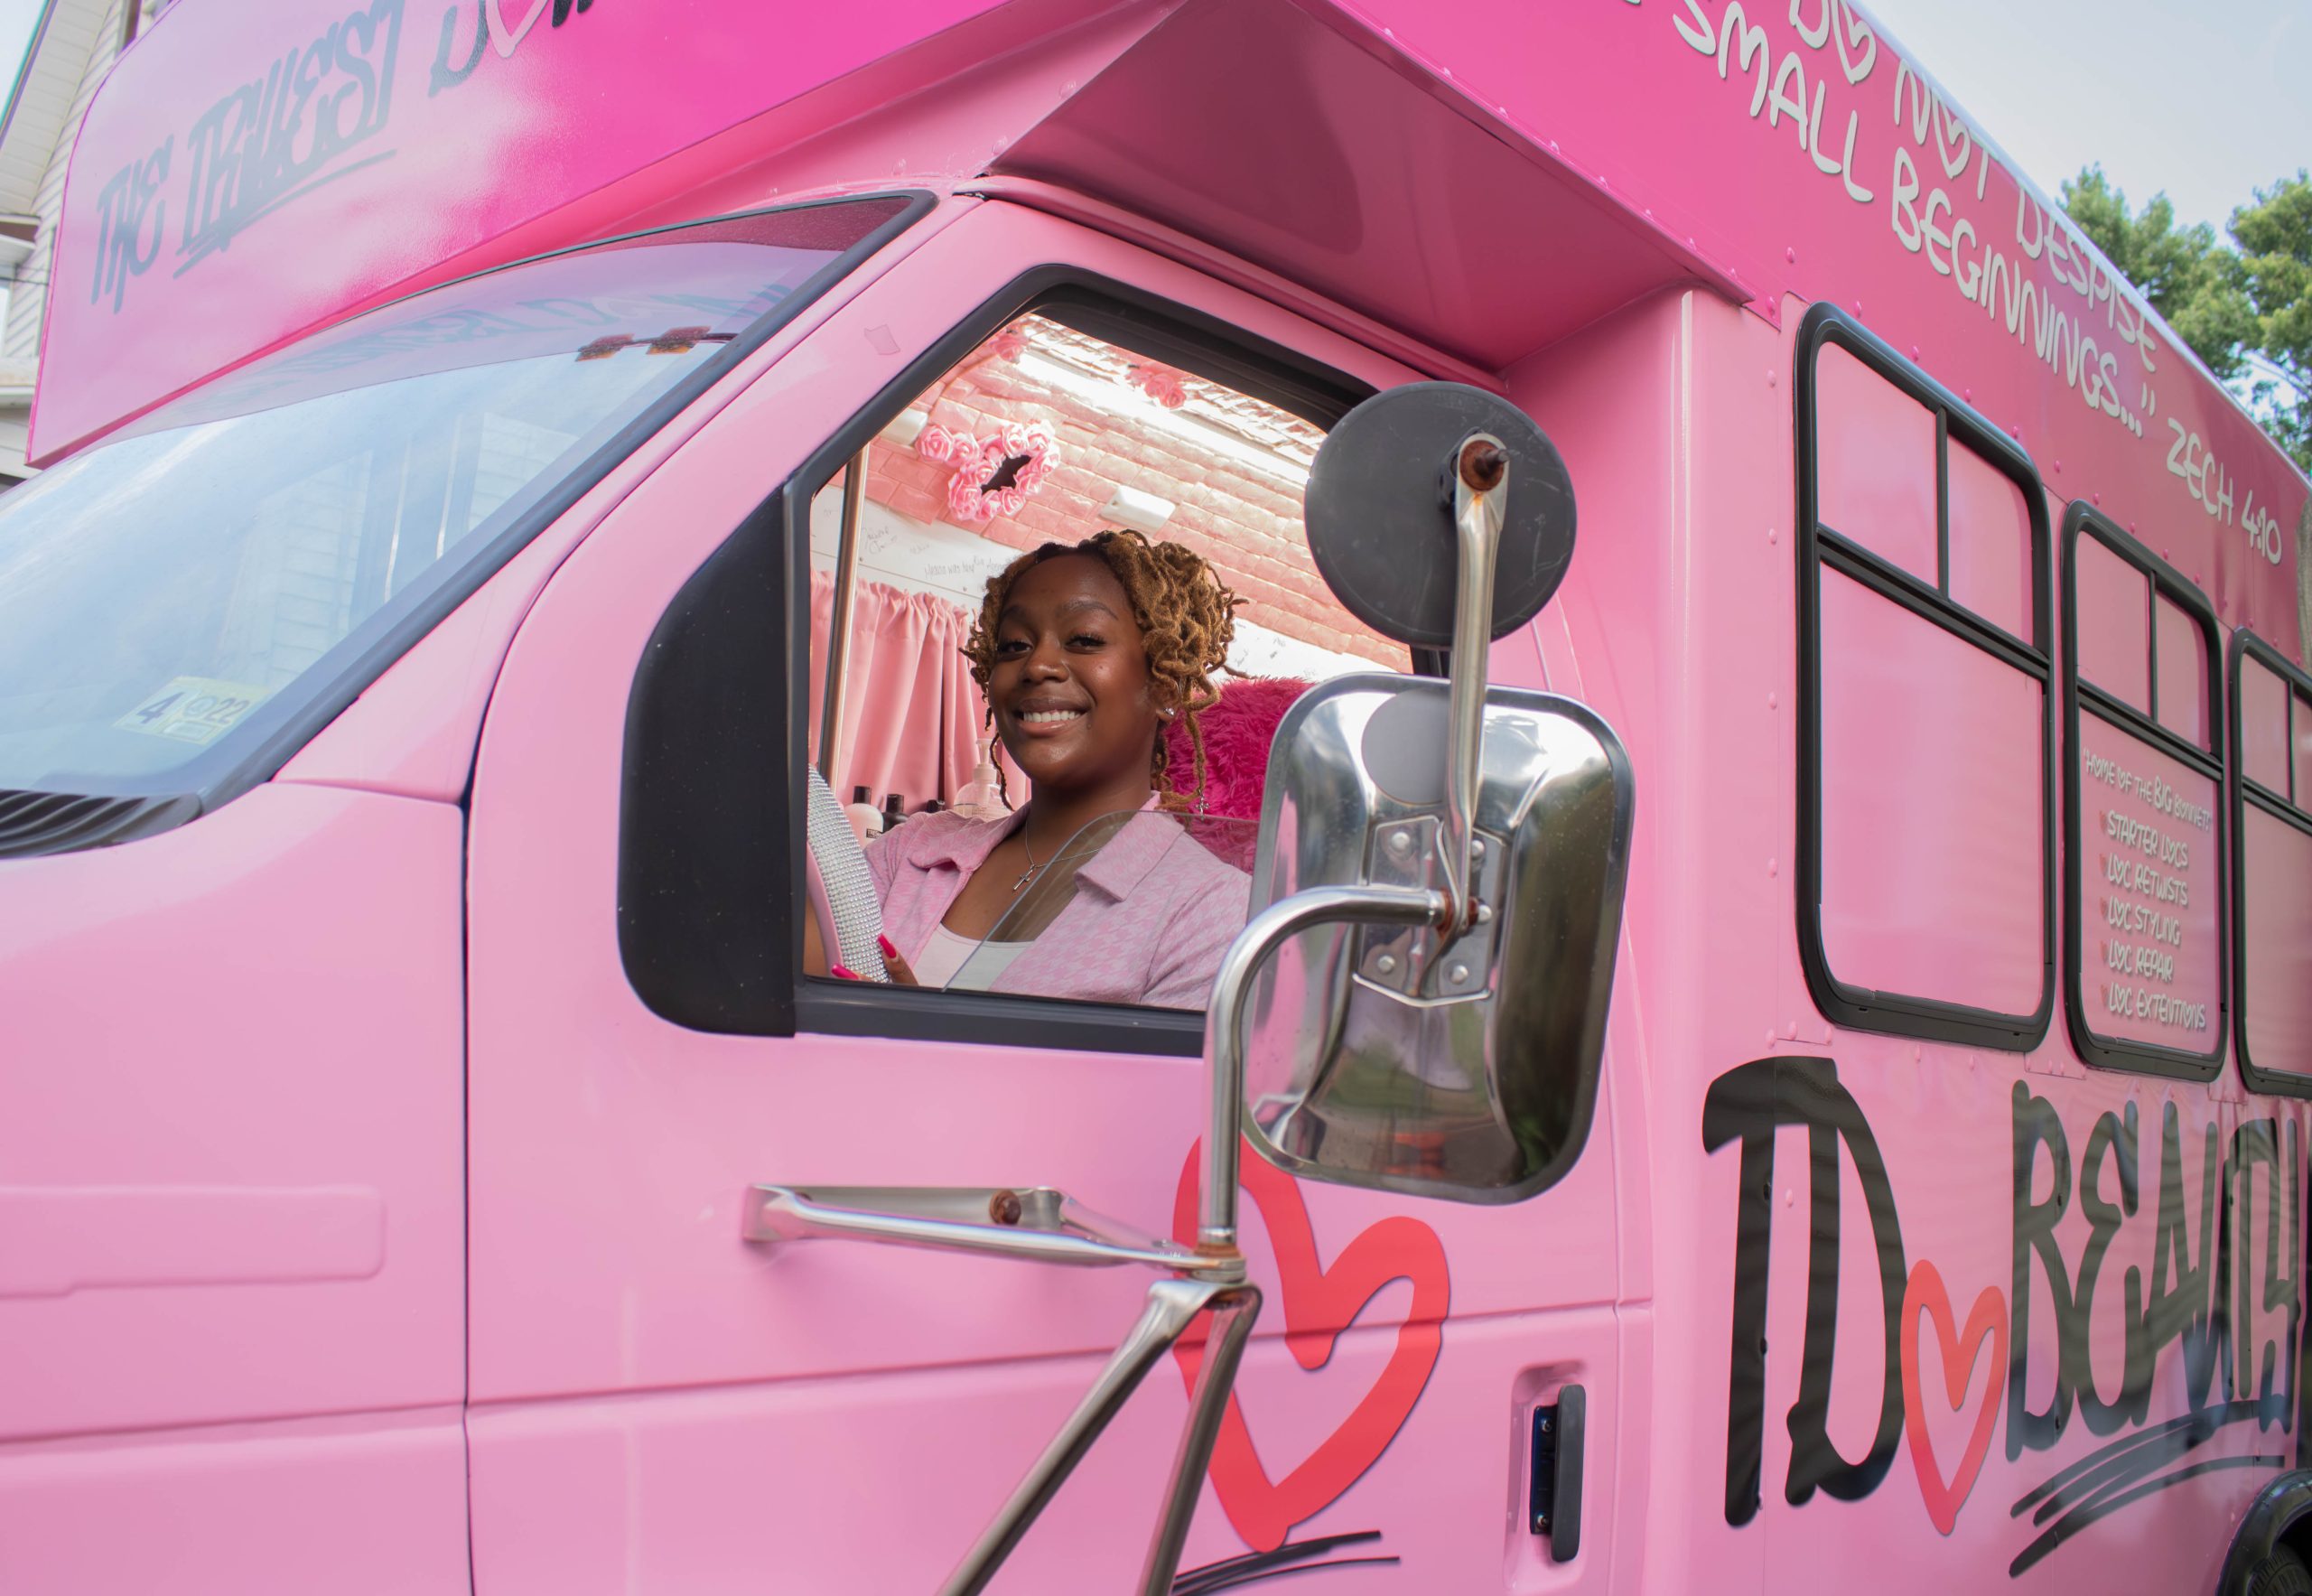 In a bright pink bus, this Baltimore mobile salon owner helps clients embrace their natural hair through locs